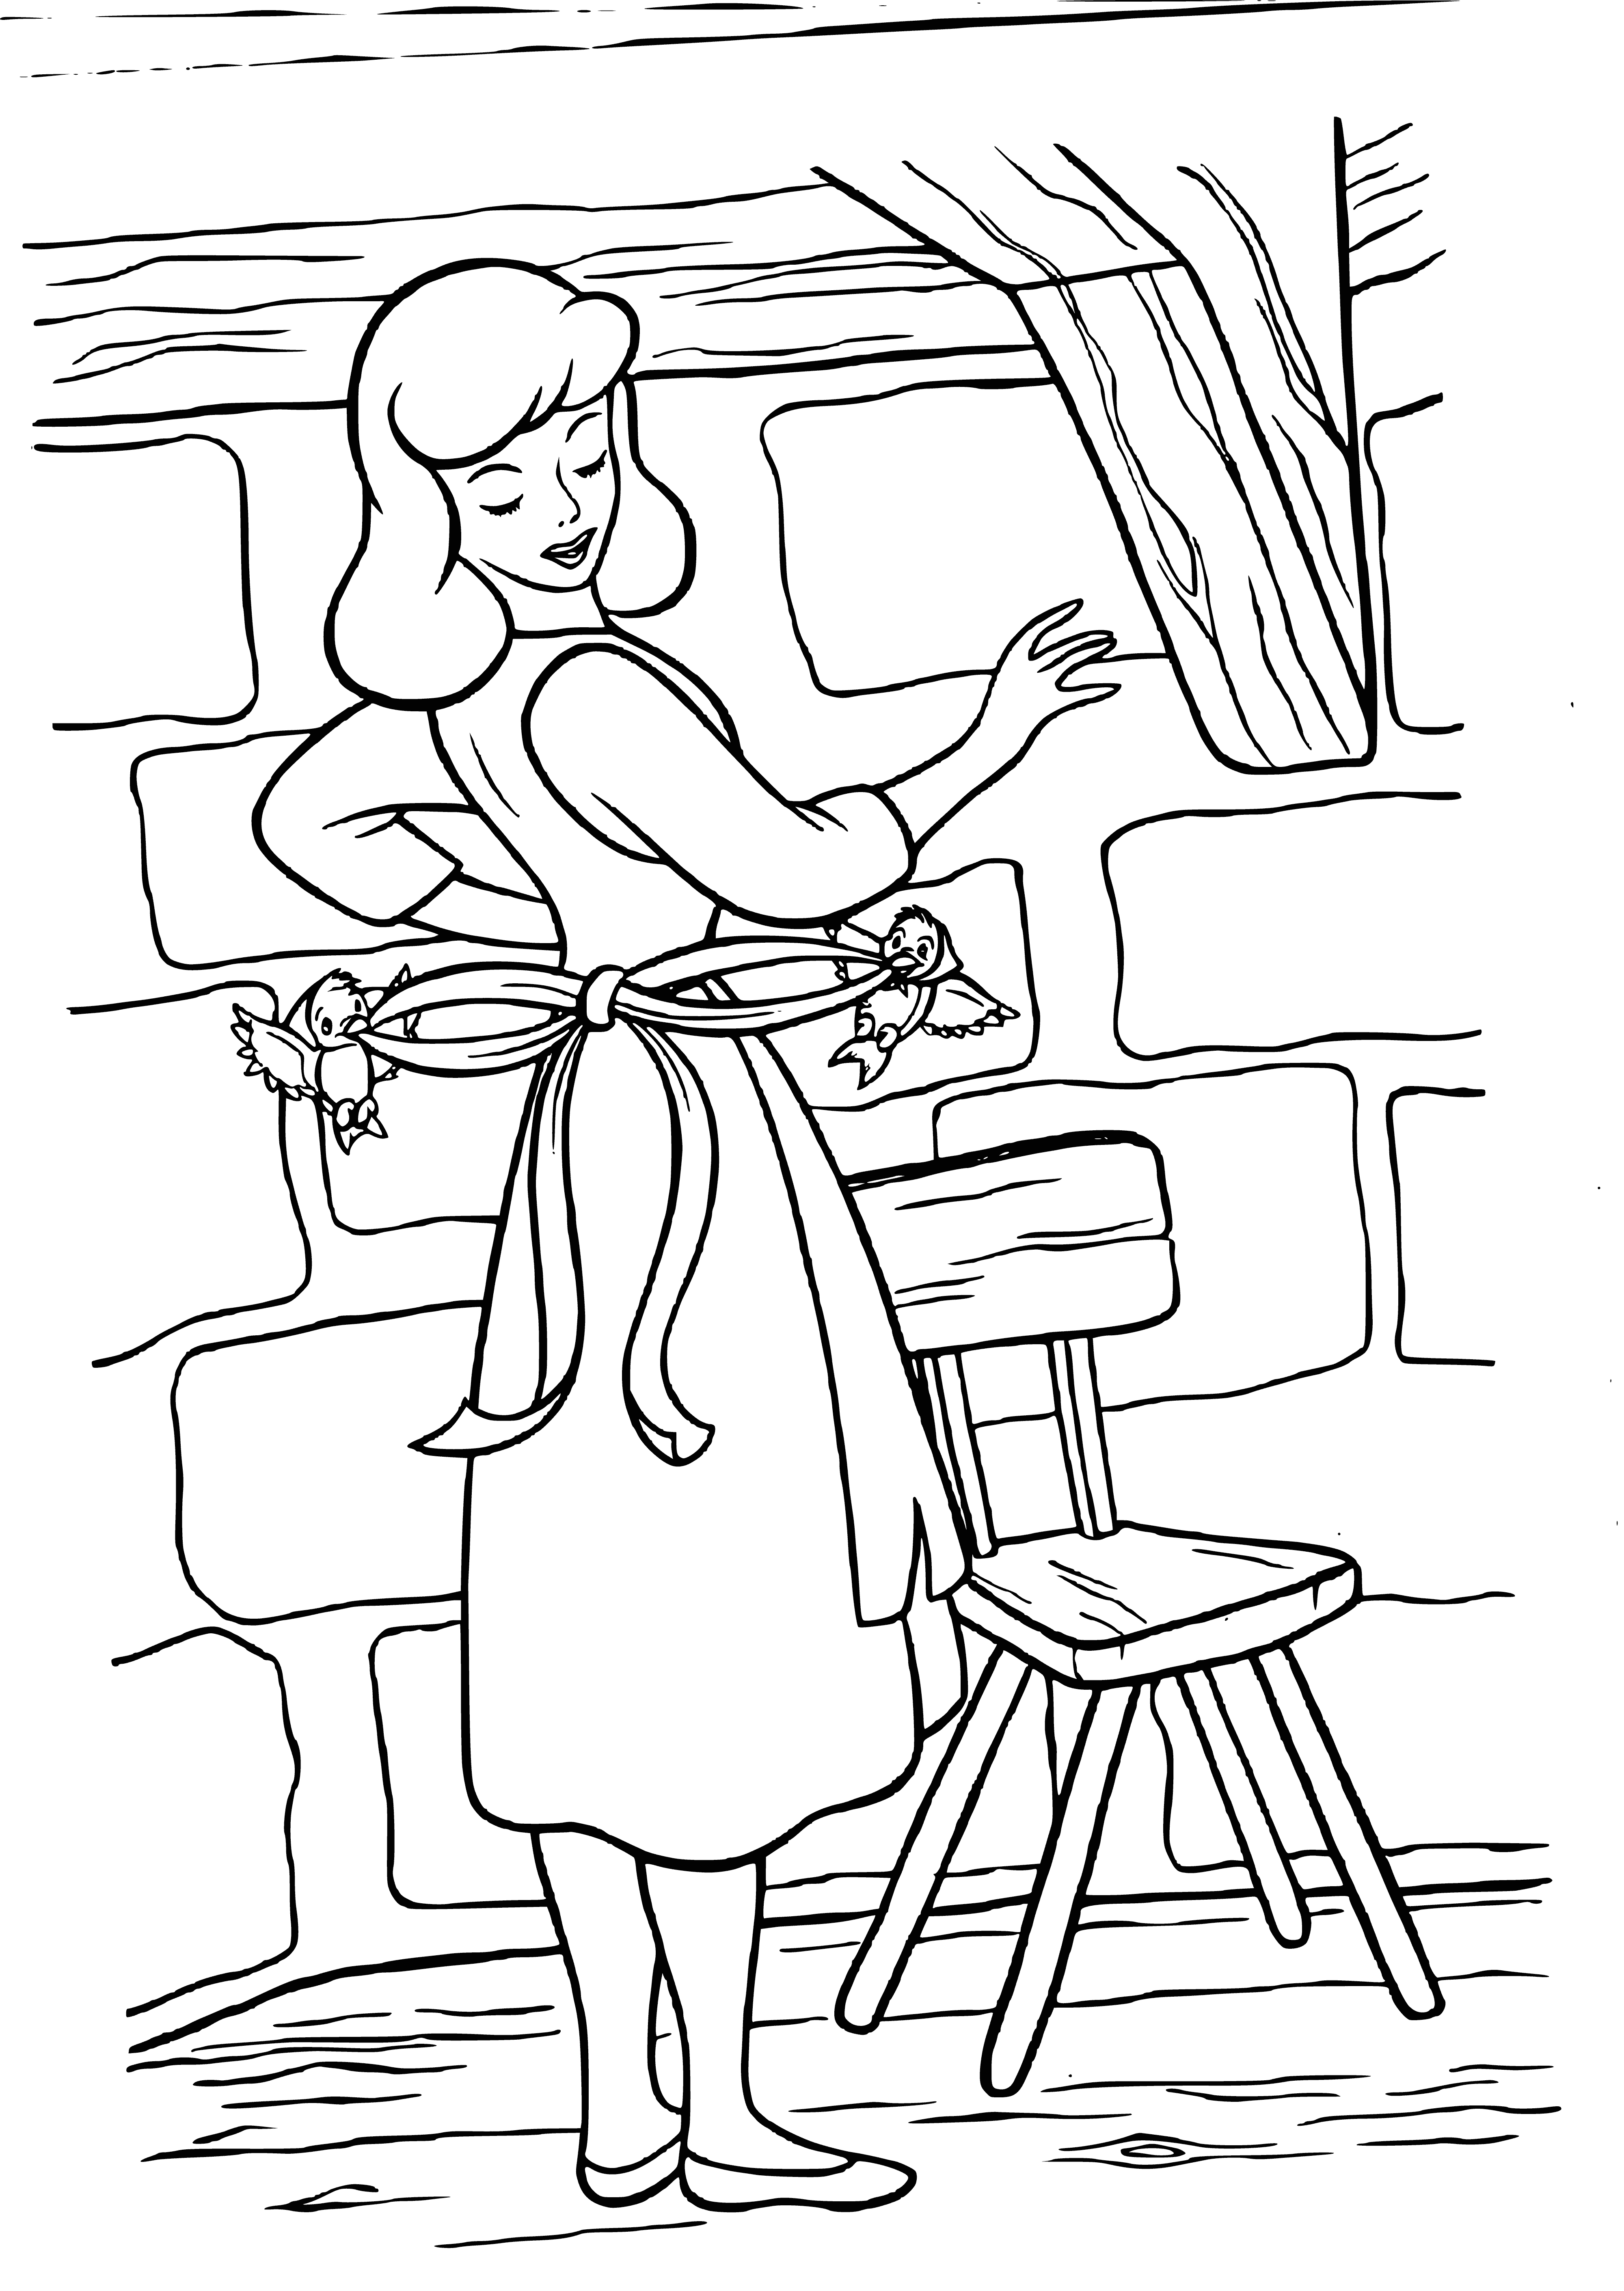 coloring page: Woman and bird share a sweet moment in nature, surrounded by tweeting birds and gentle breeze.